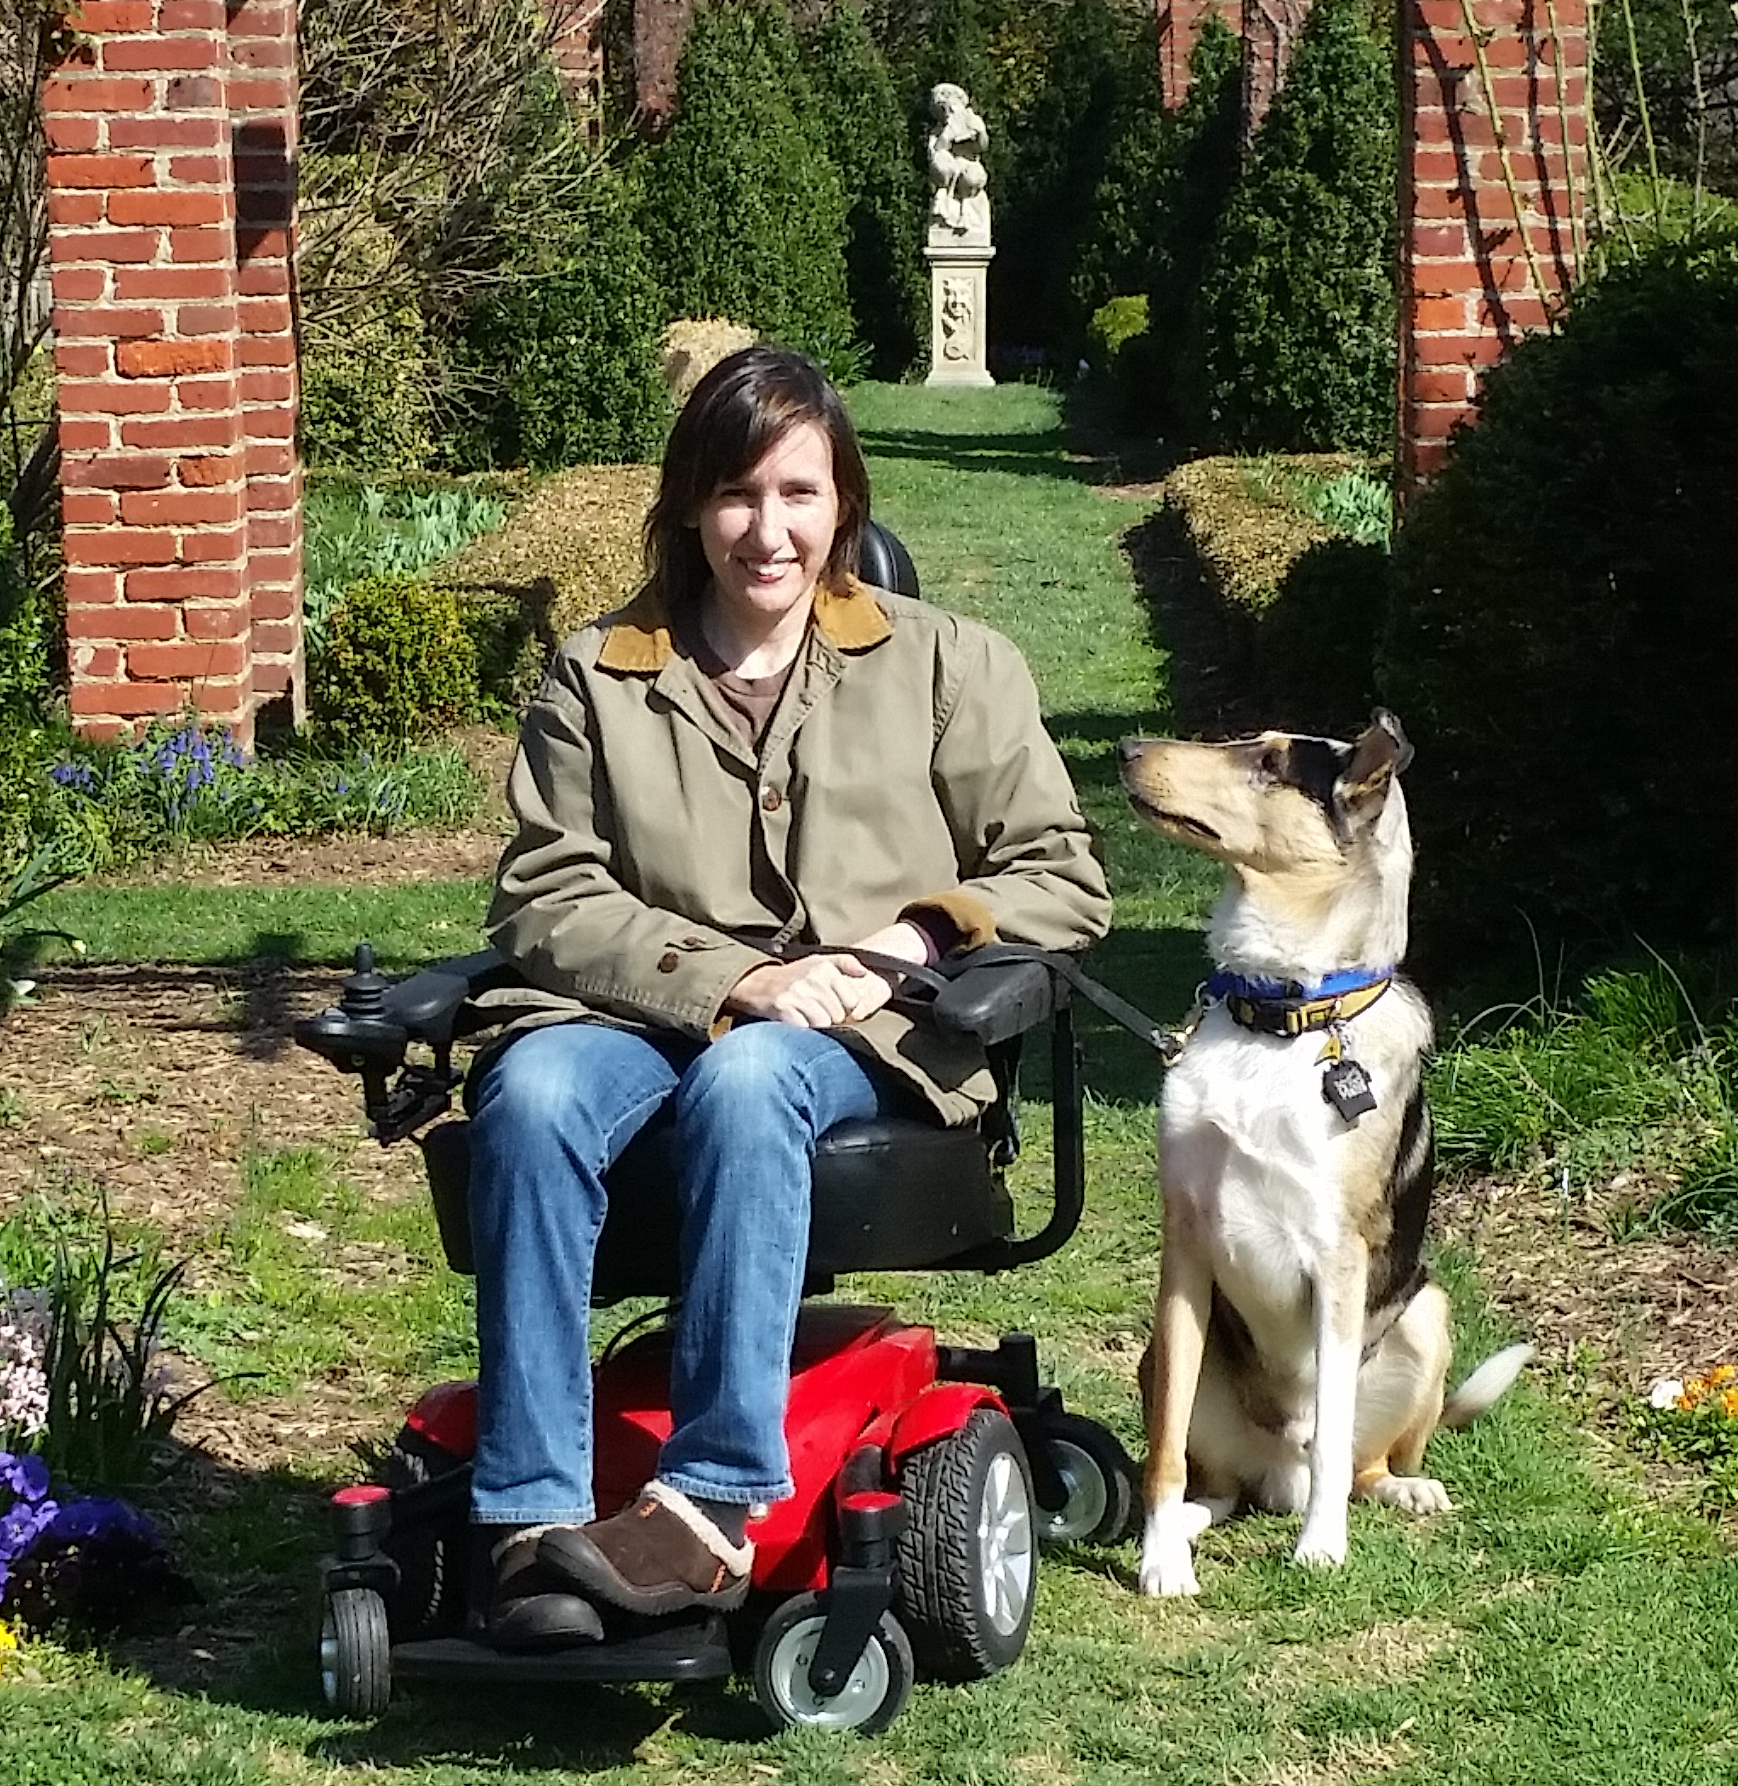 Professional dog trainer in wheelchair with service dog